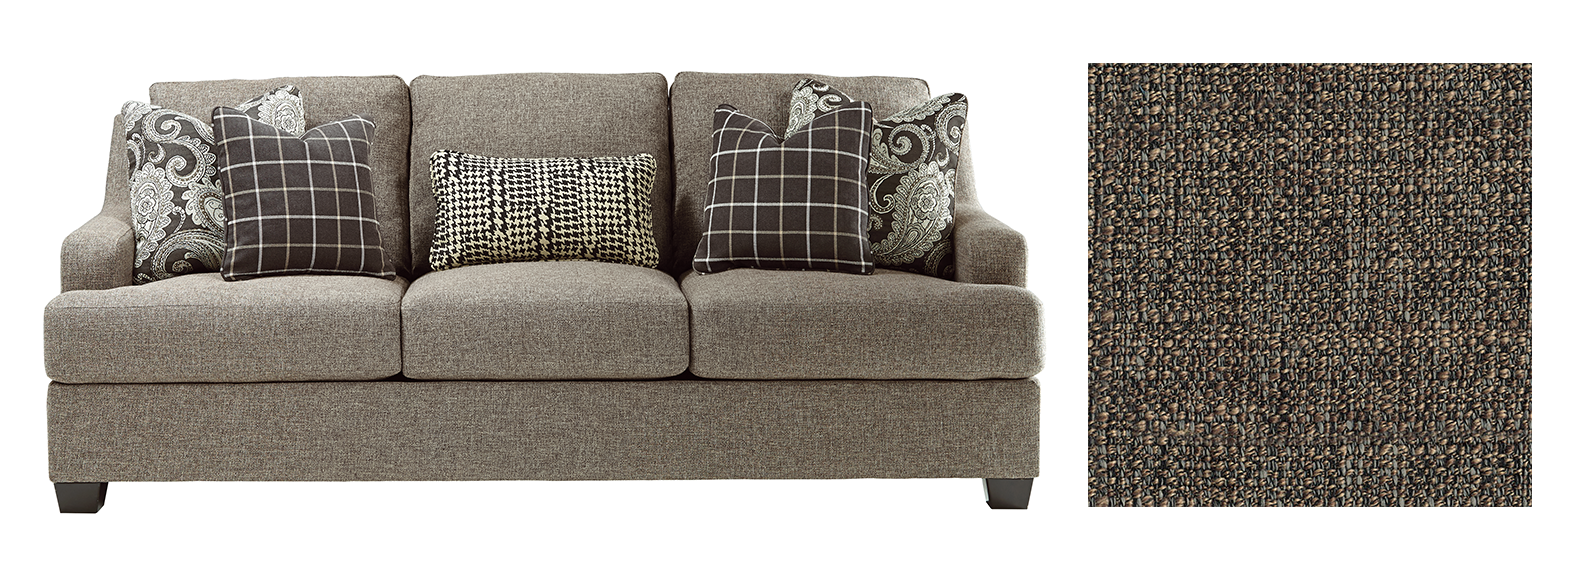 A Guide To Types Of Sofa Materia